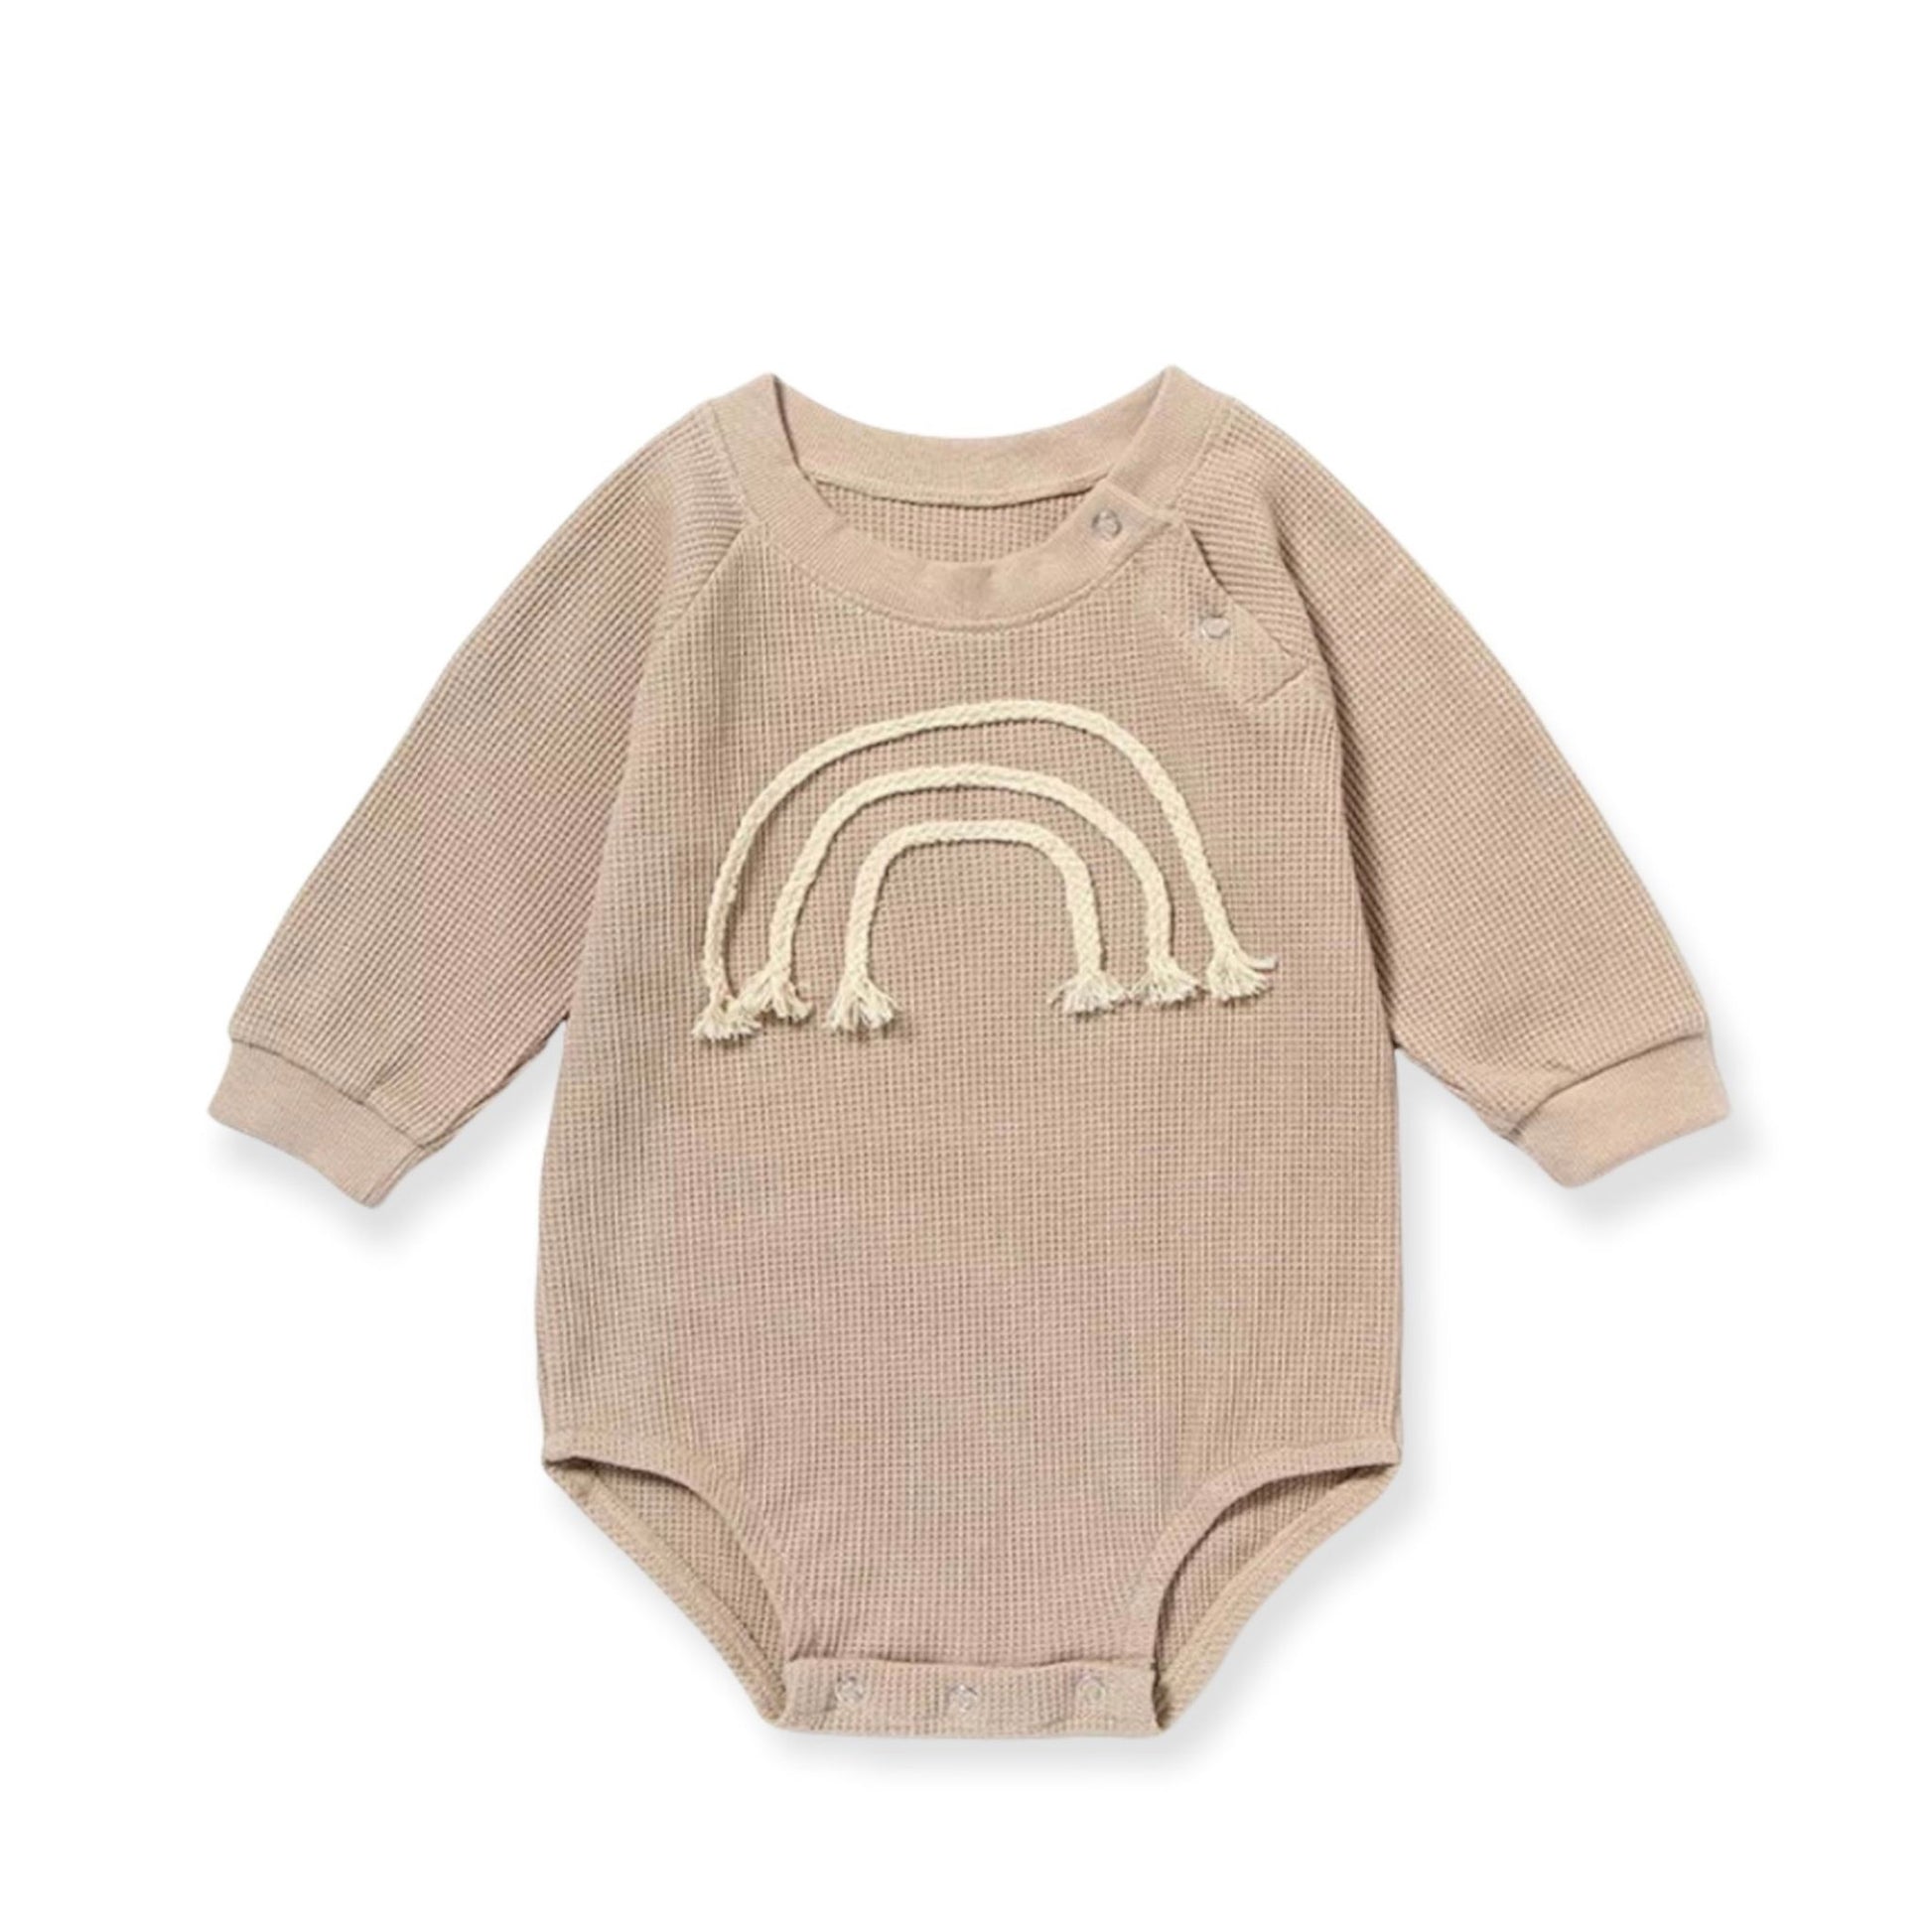 Taupe newborn and baby onesie with rainbow on chest | cotton baby onesie | cotton baby bodysuits for newborn and babies |hunny bubba kids